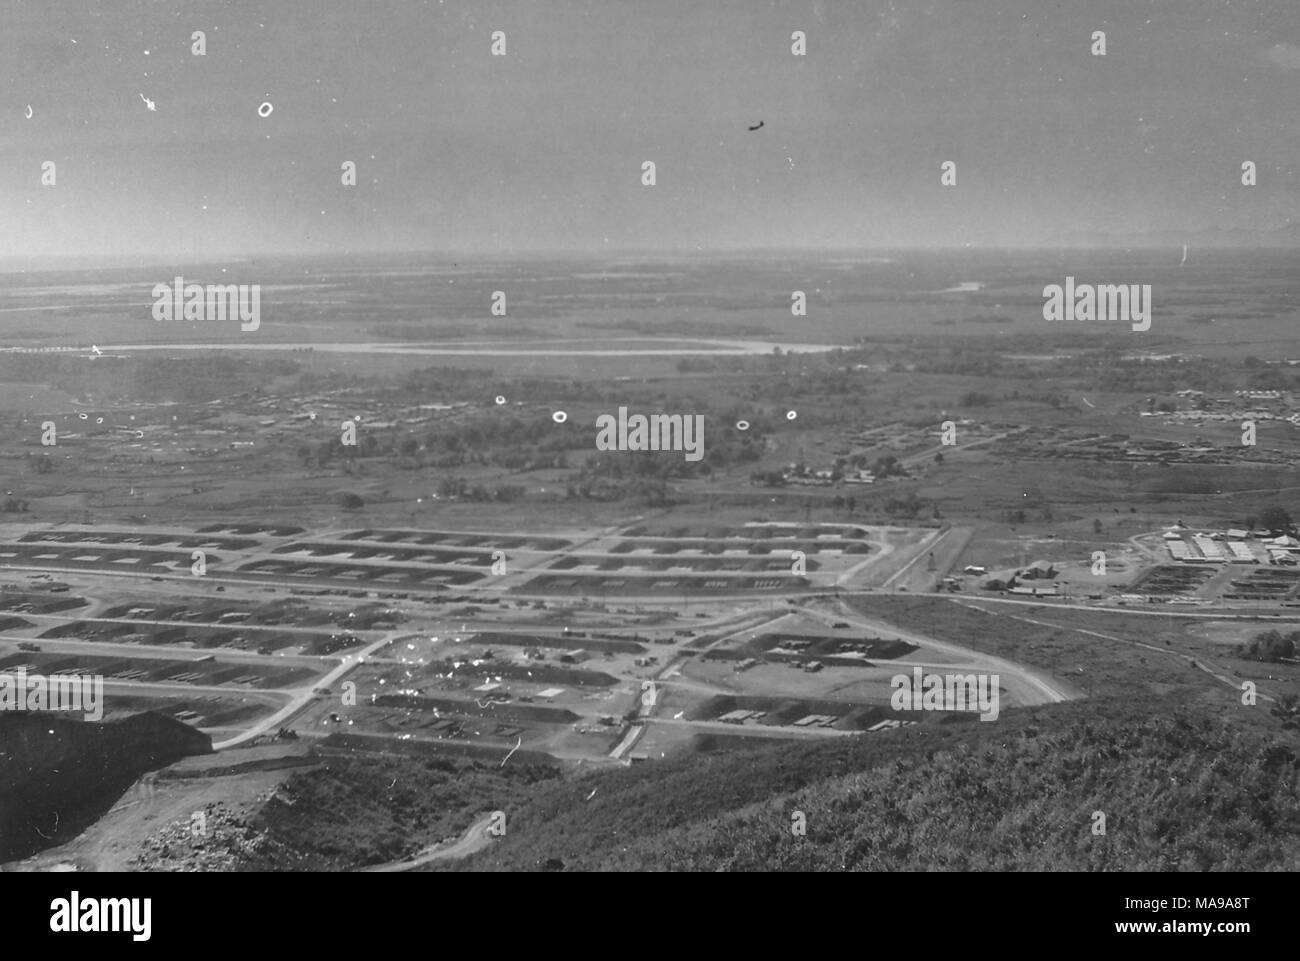 Black and white photograph showing an aerial view, or a view shot from a hill, over a flat landscape, with roads or landing strips, and several buildings, likely the barracks of the US Marine Corps camp, located at midground, photographed in Vietnam during the Vietnam War (1955-1975), 1968. () Stock Photo